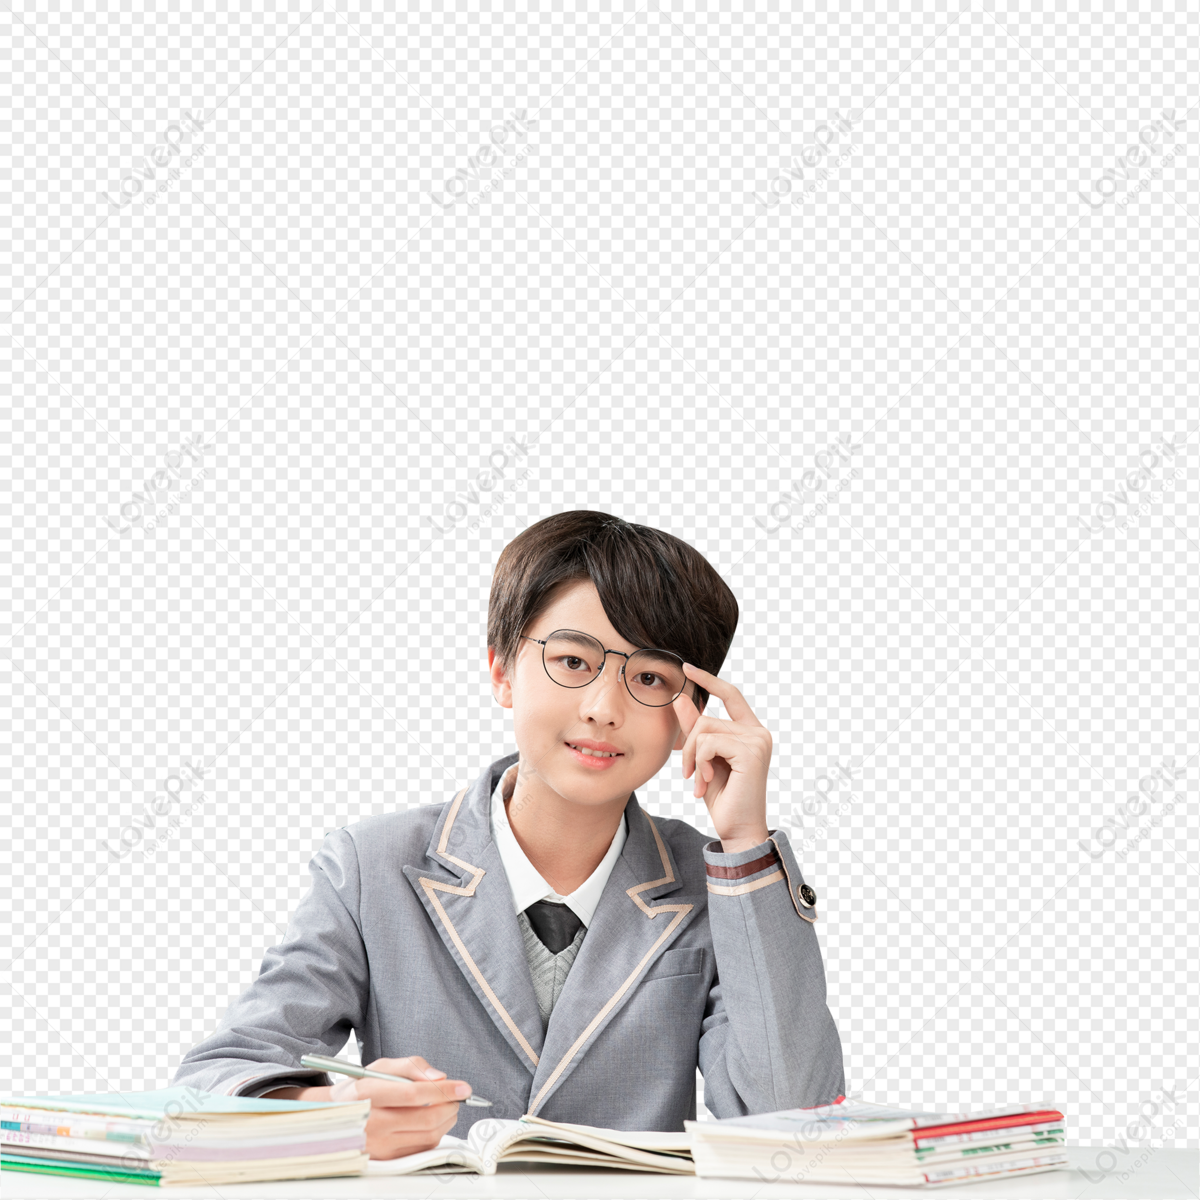 Male student doing homework, material, and homework, asian student png transparent background